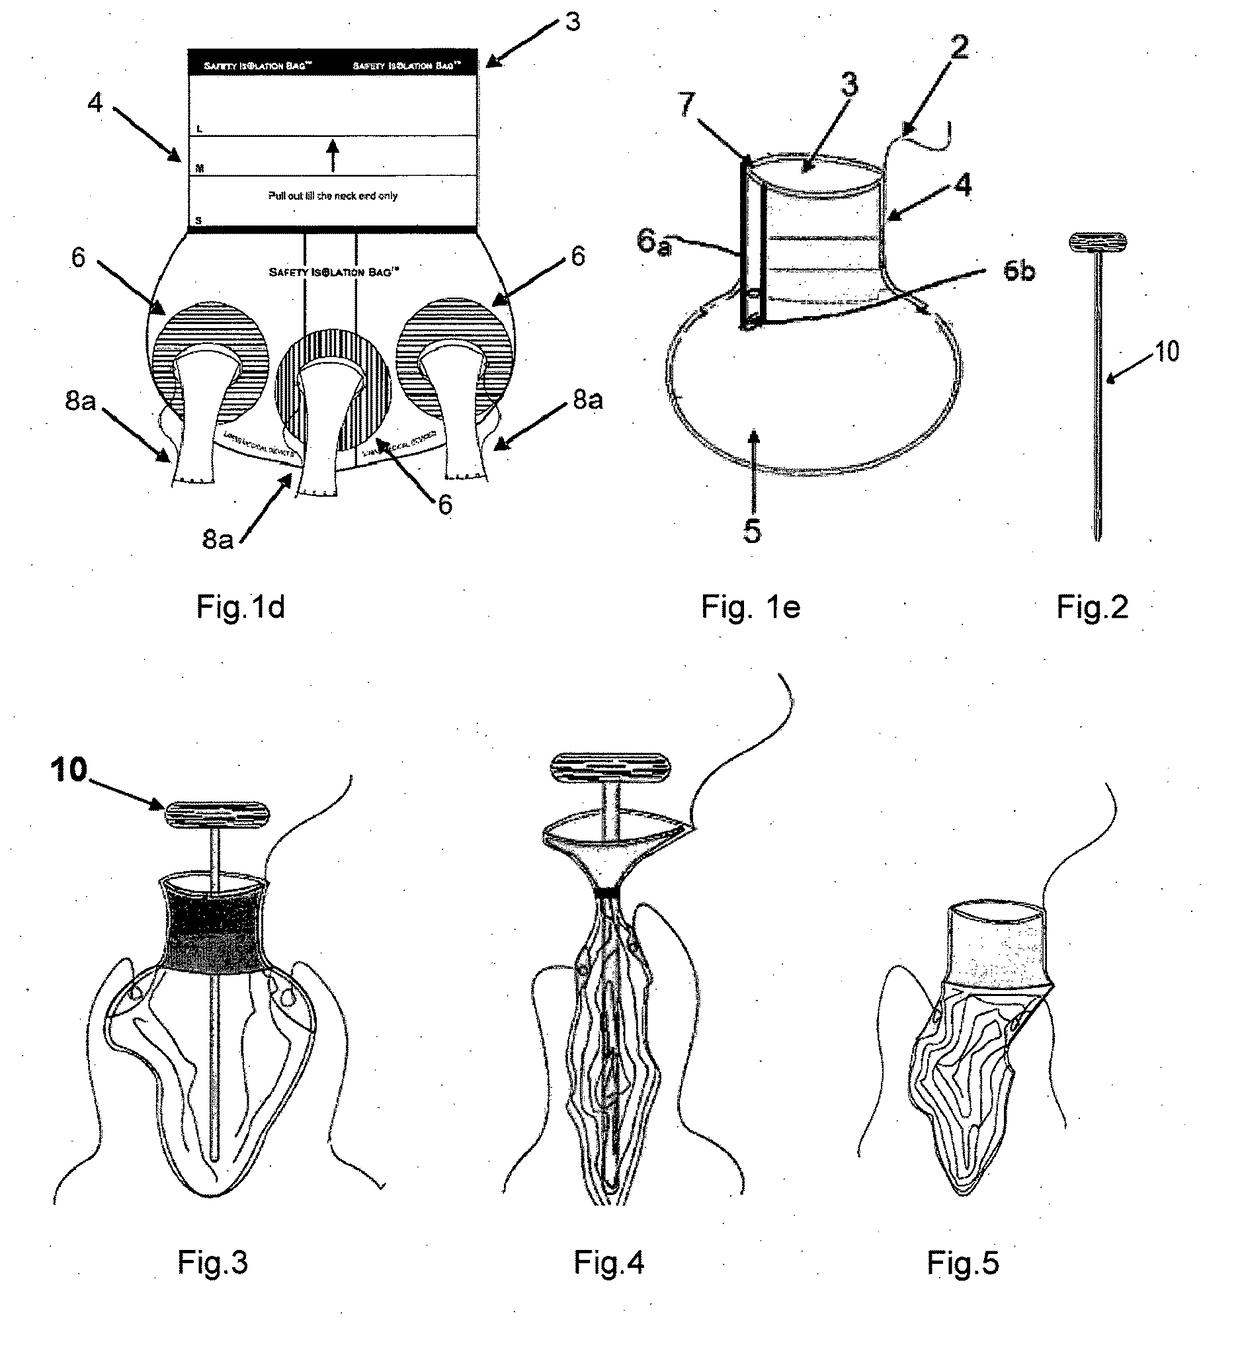 Safety isolation bags for intra abdominal, endoscopic procedures, power morcellation and vaginal morcellation